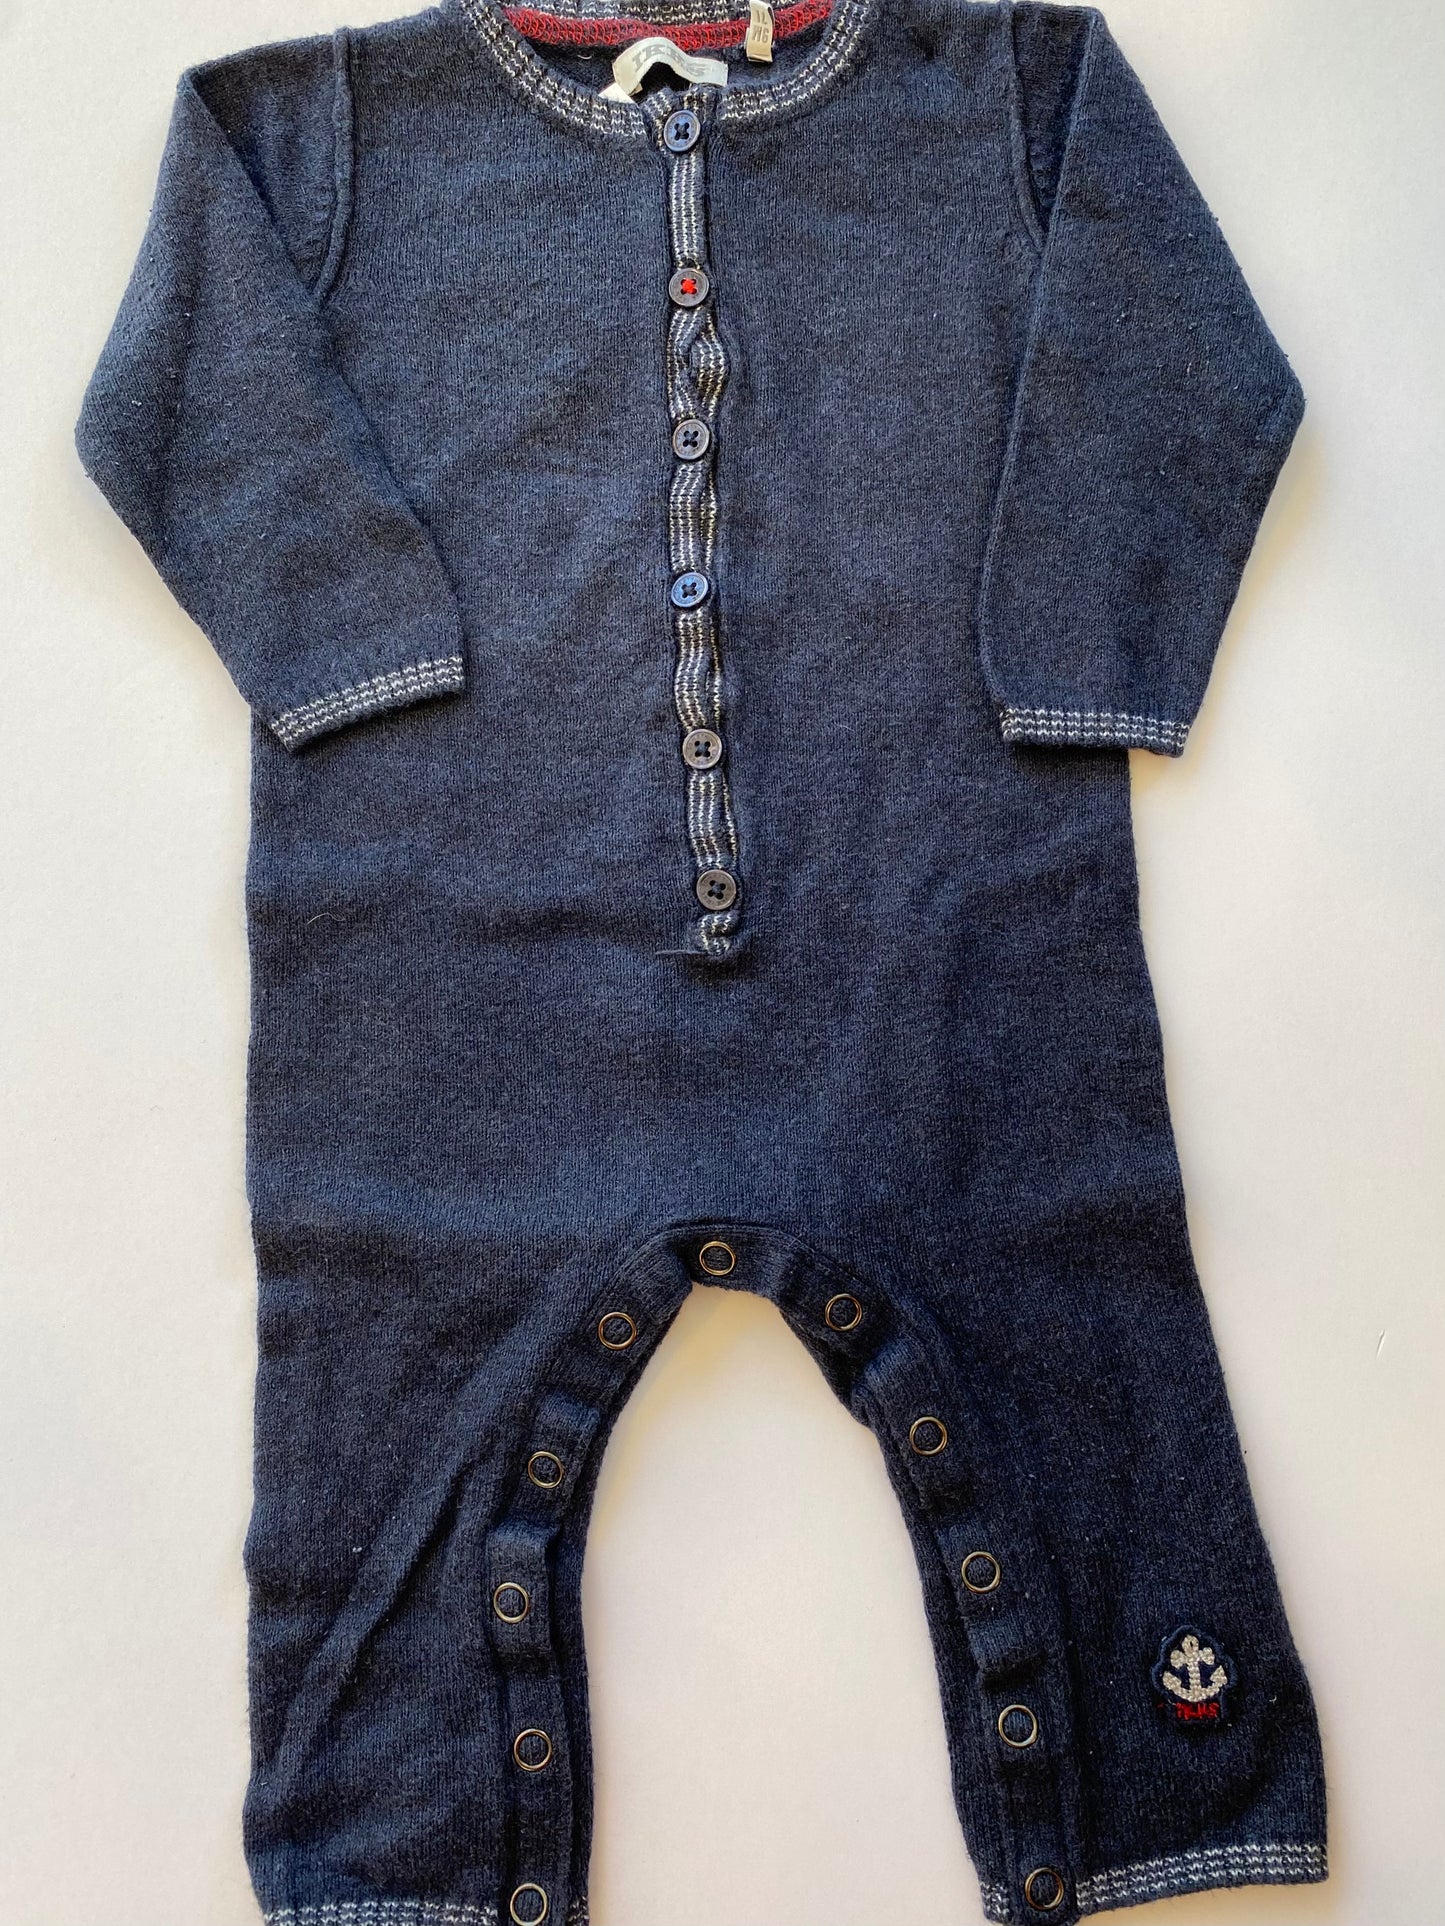 IKKS Overall Size 9M